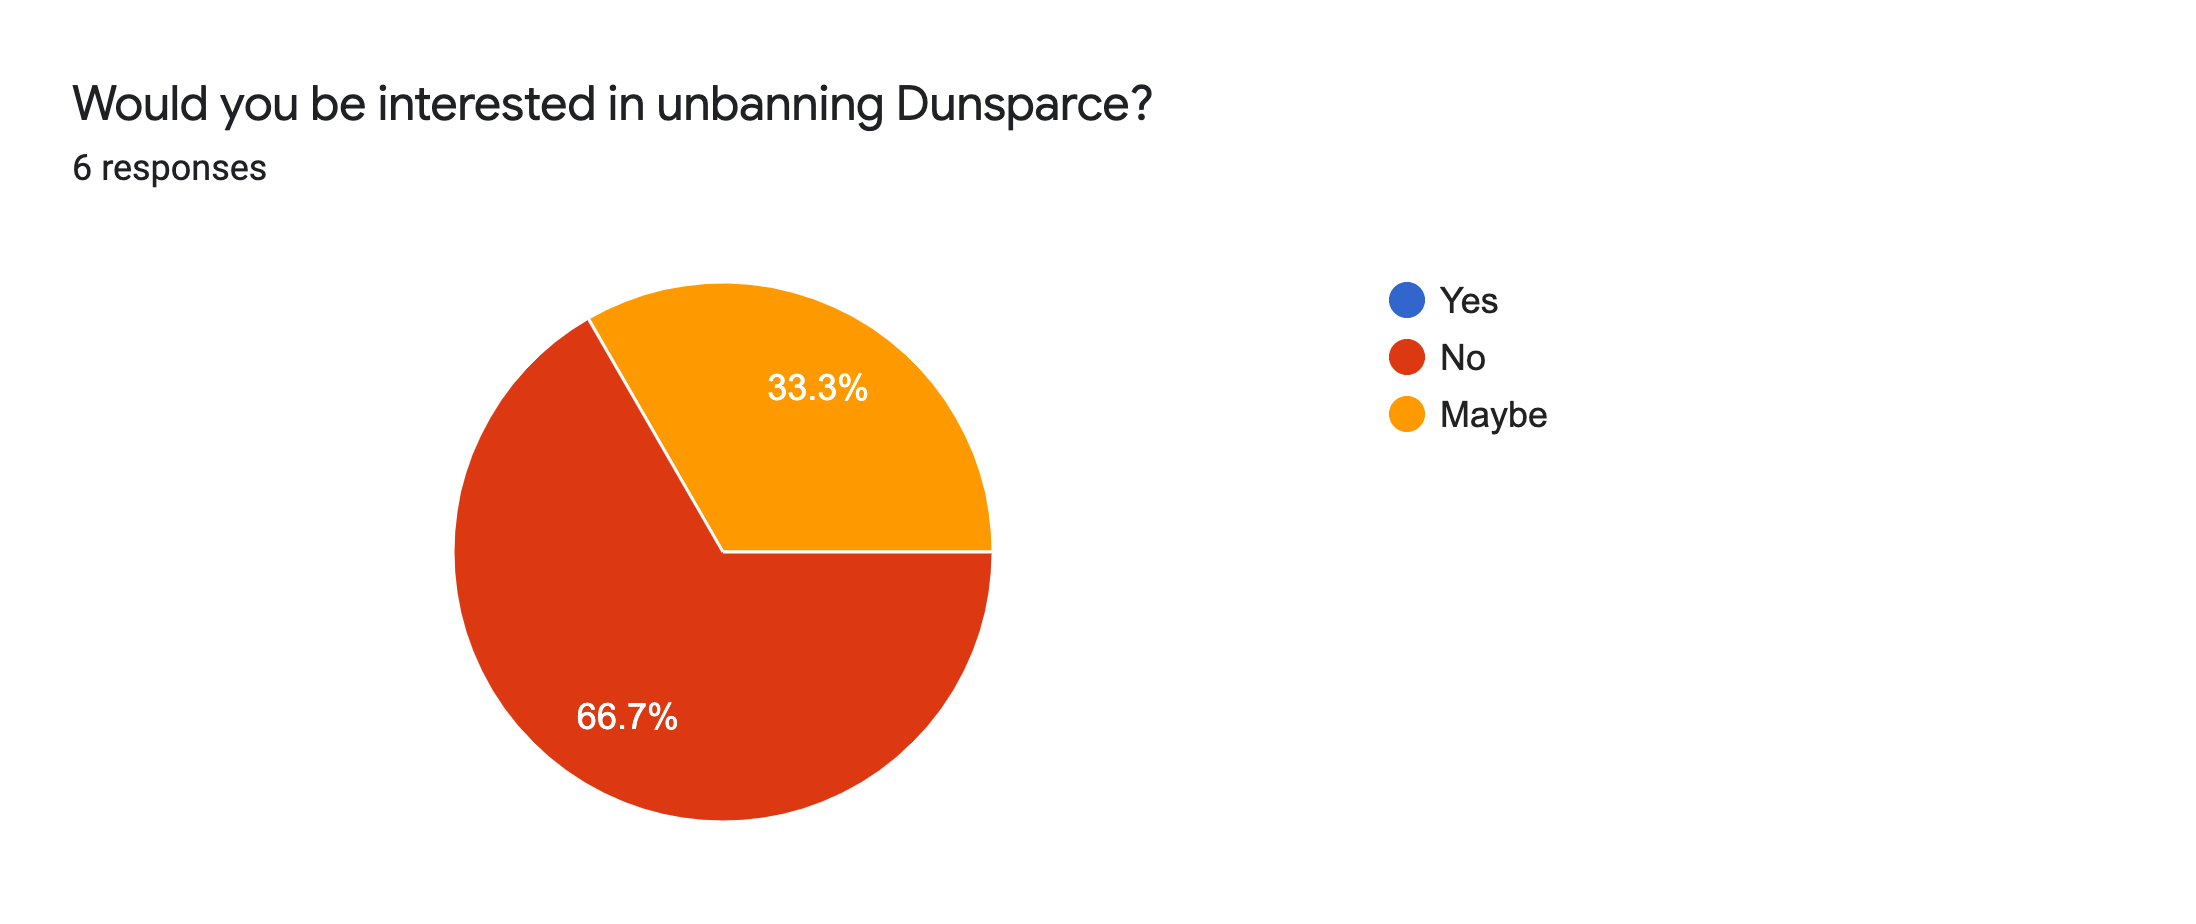 Forms response chart. Question title: Would you be interested in unbanning Dunsparce?. Number of responses: 6 responses.